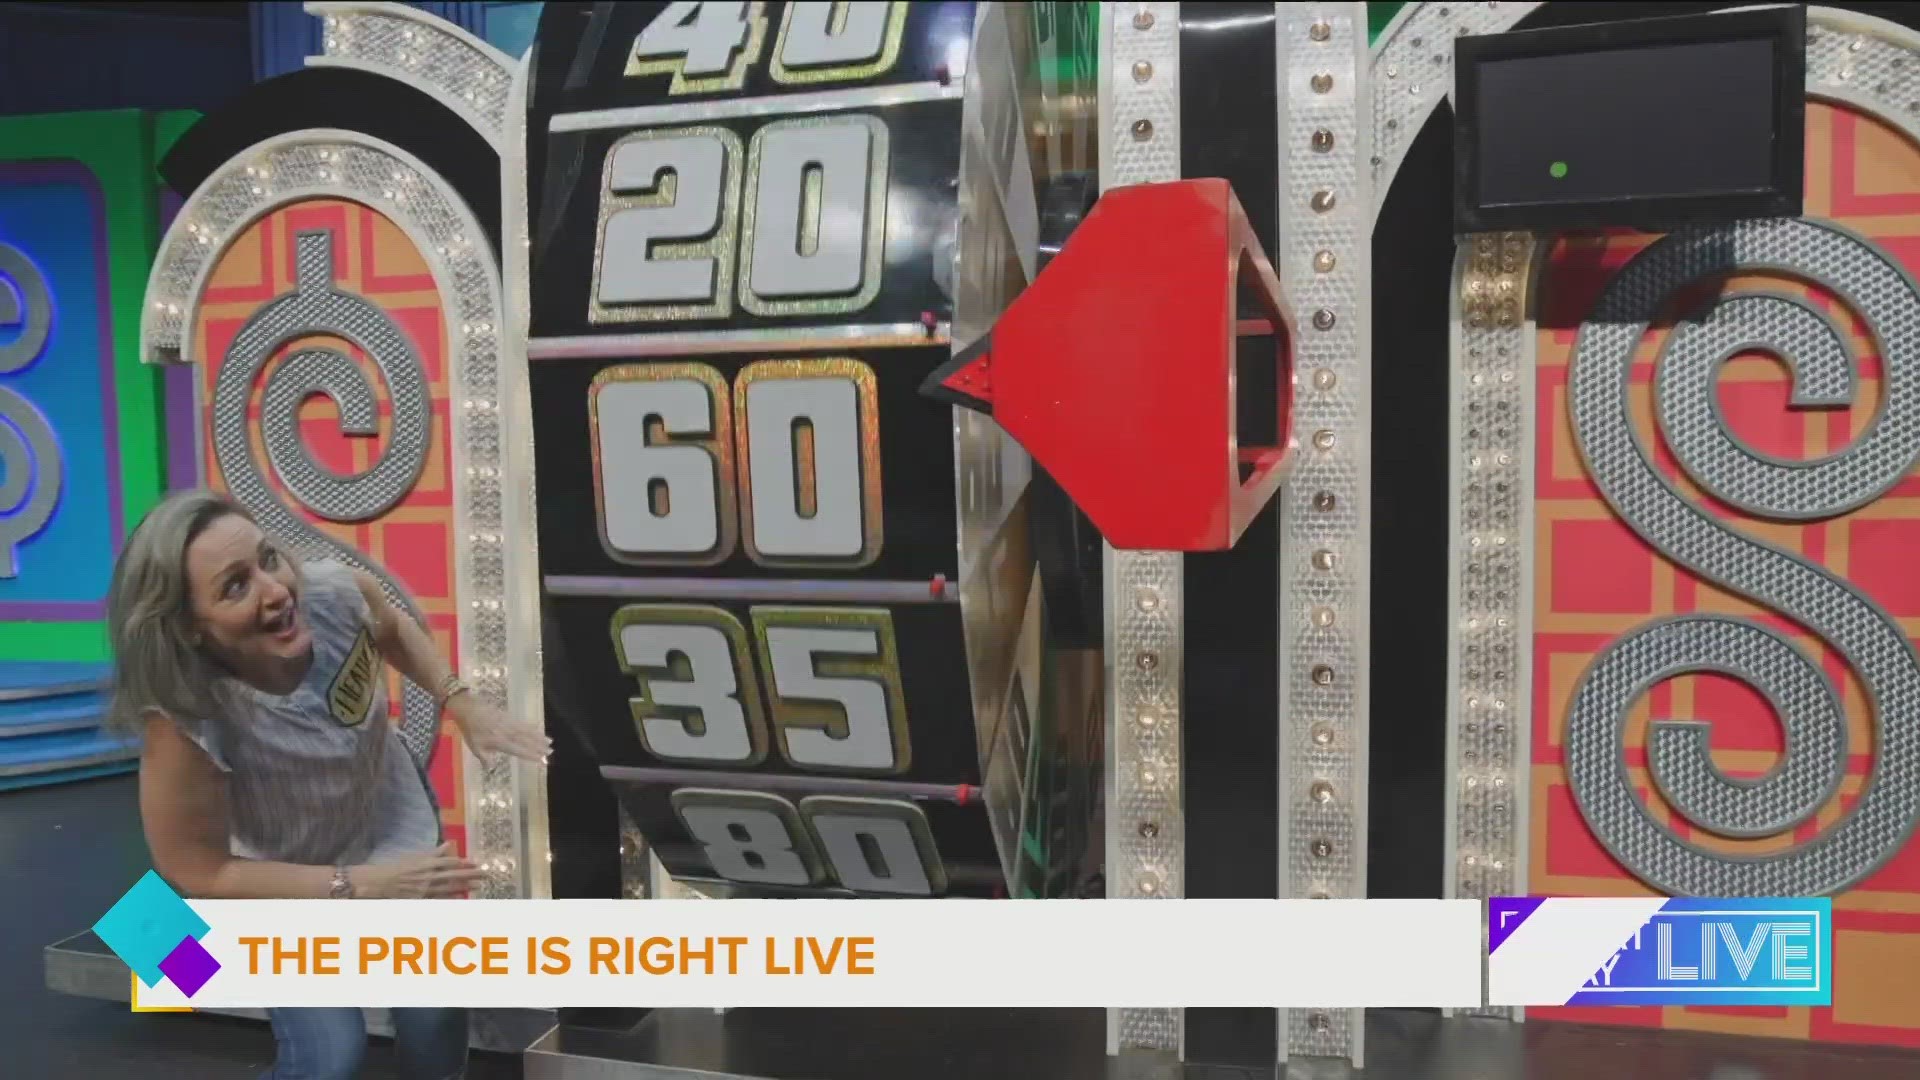 The Price is Right LIVE - COME ON DOWN!